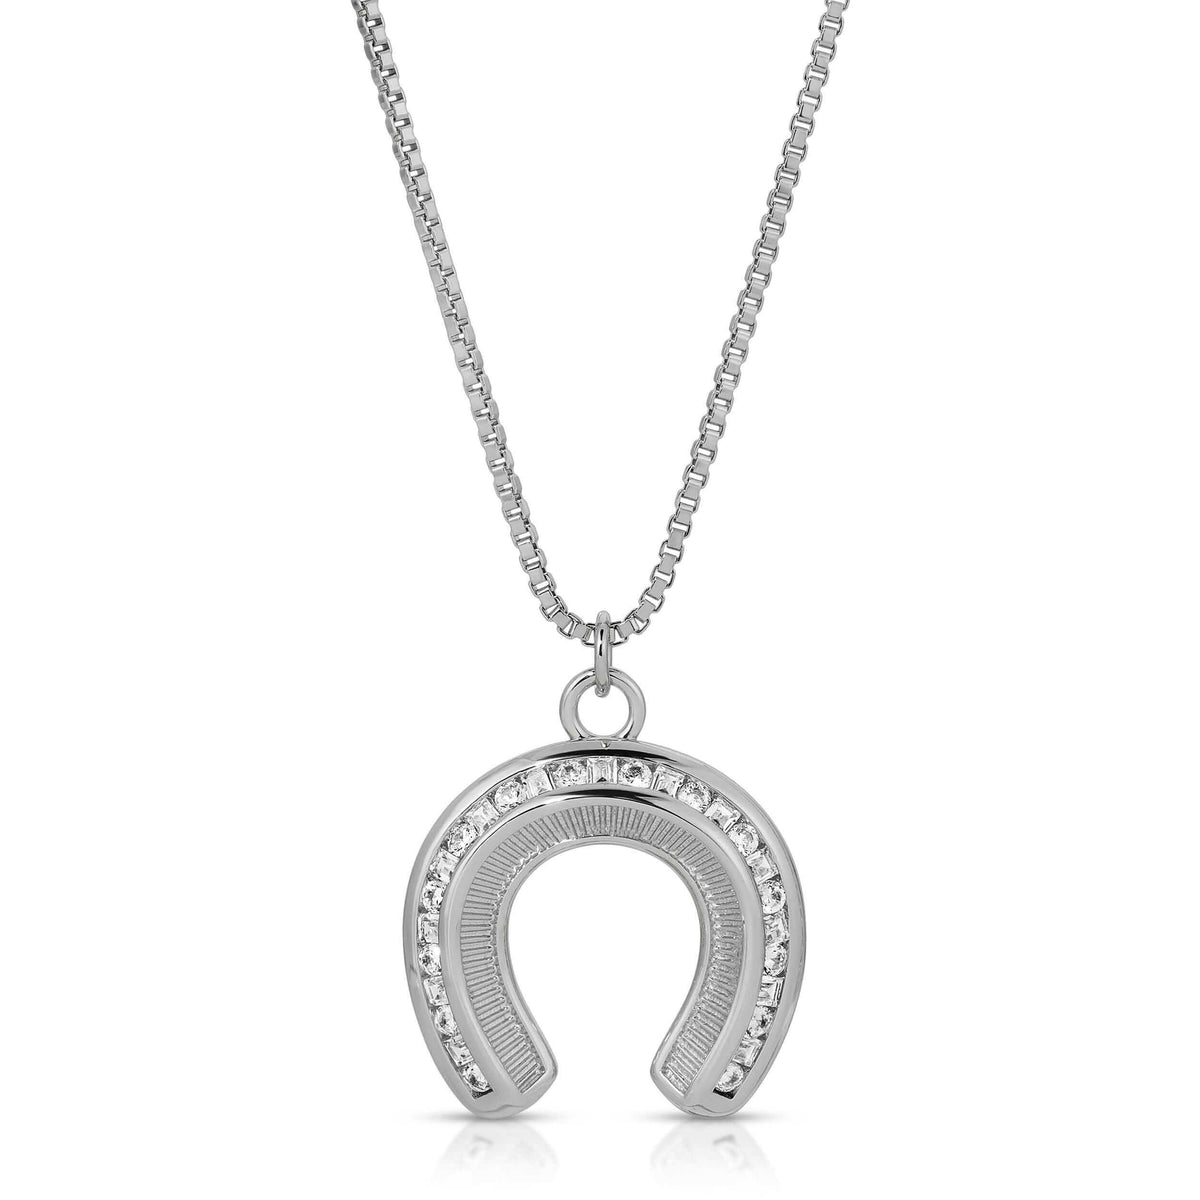 Good Fortune Horseshoe Necklace- Gold or Silver